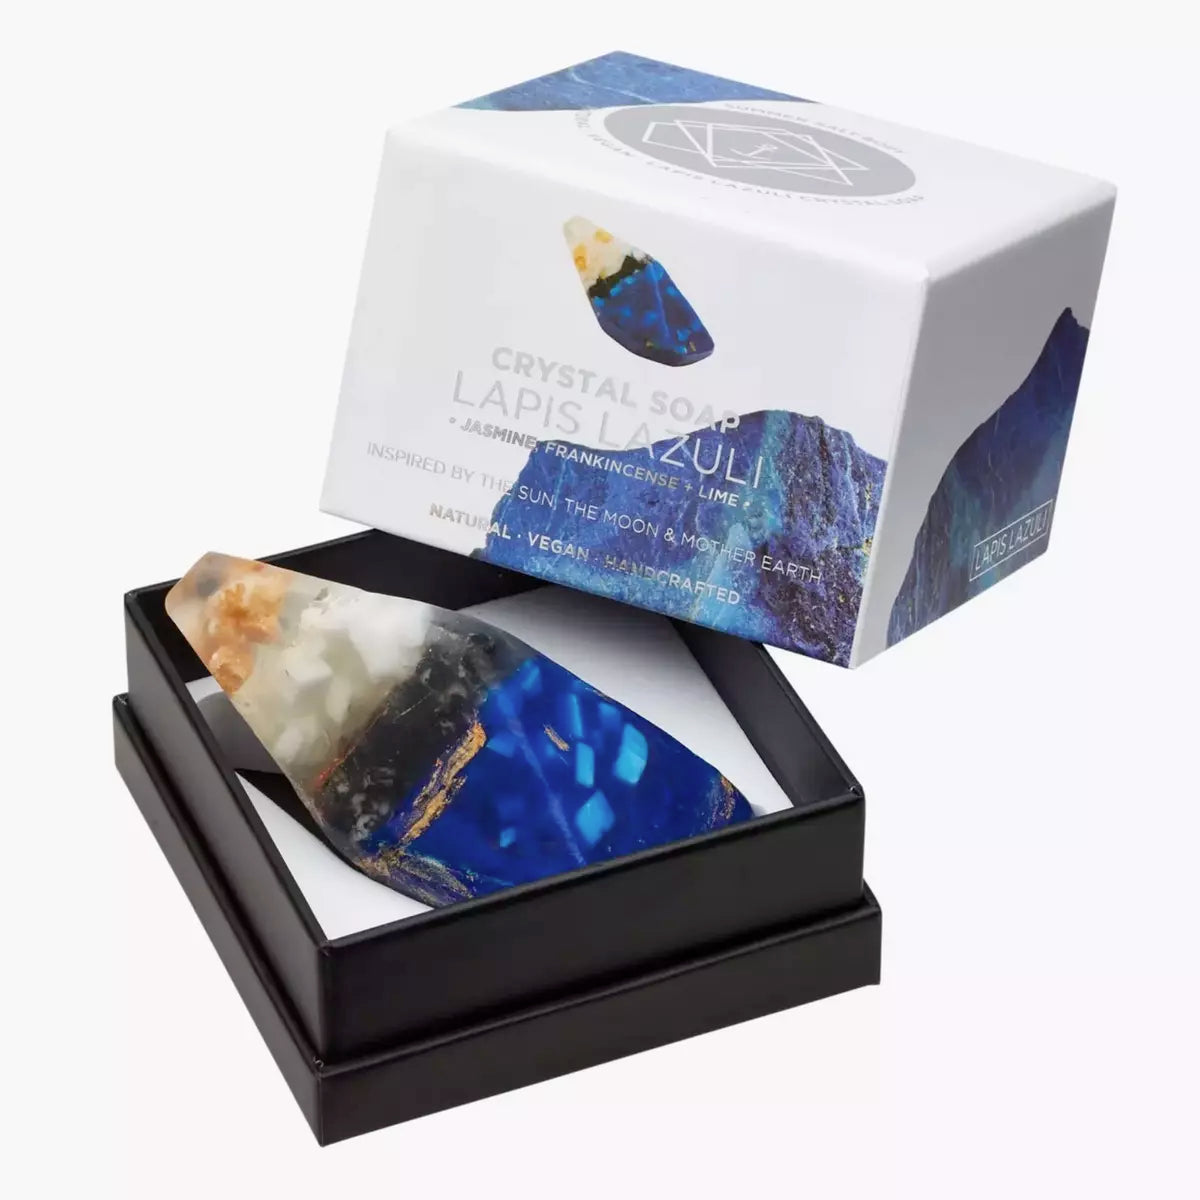 A box with a Crystal Soap - LAPIS LAZULI - Jasmine, Frankincense + Lime from Summer Salt Body in it.